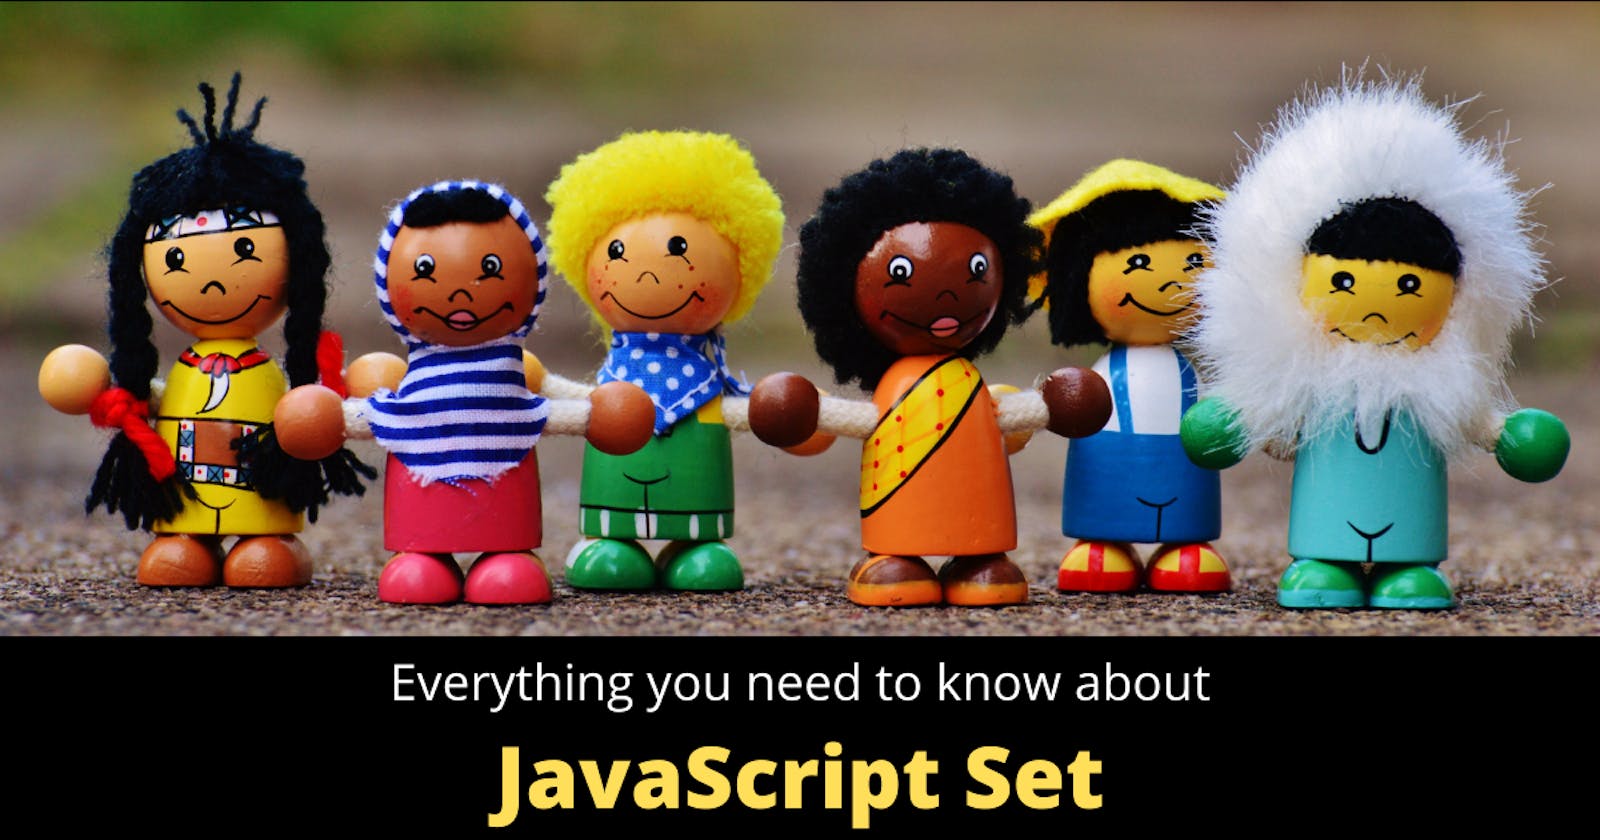 Everything you need to know about JavaScript Set